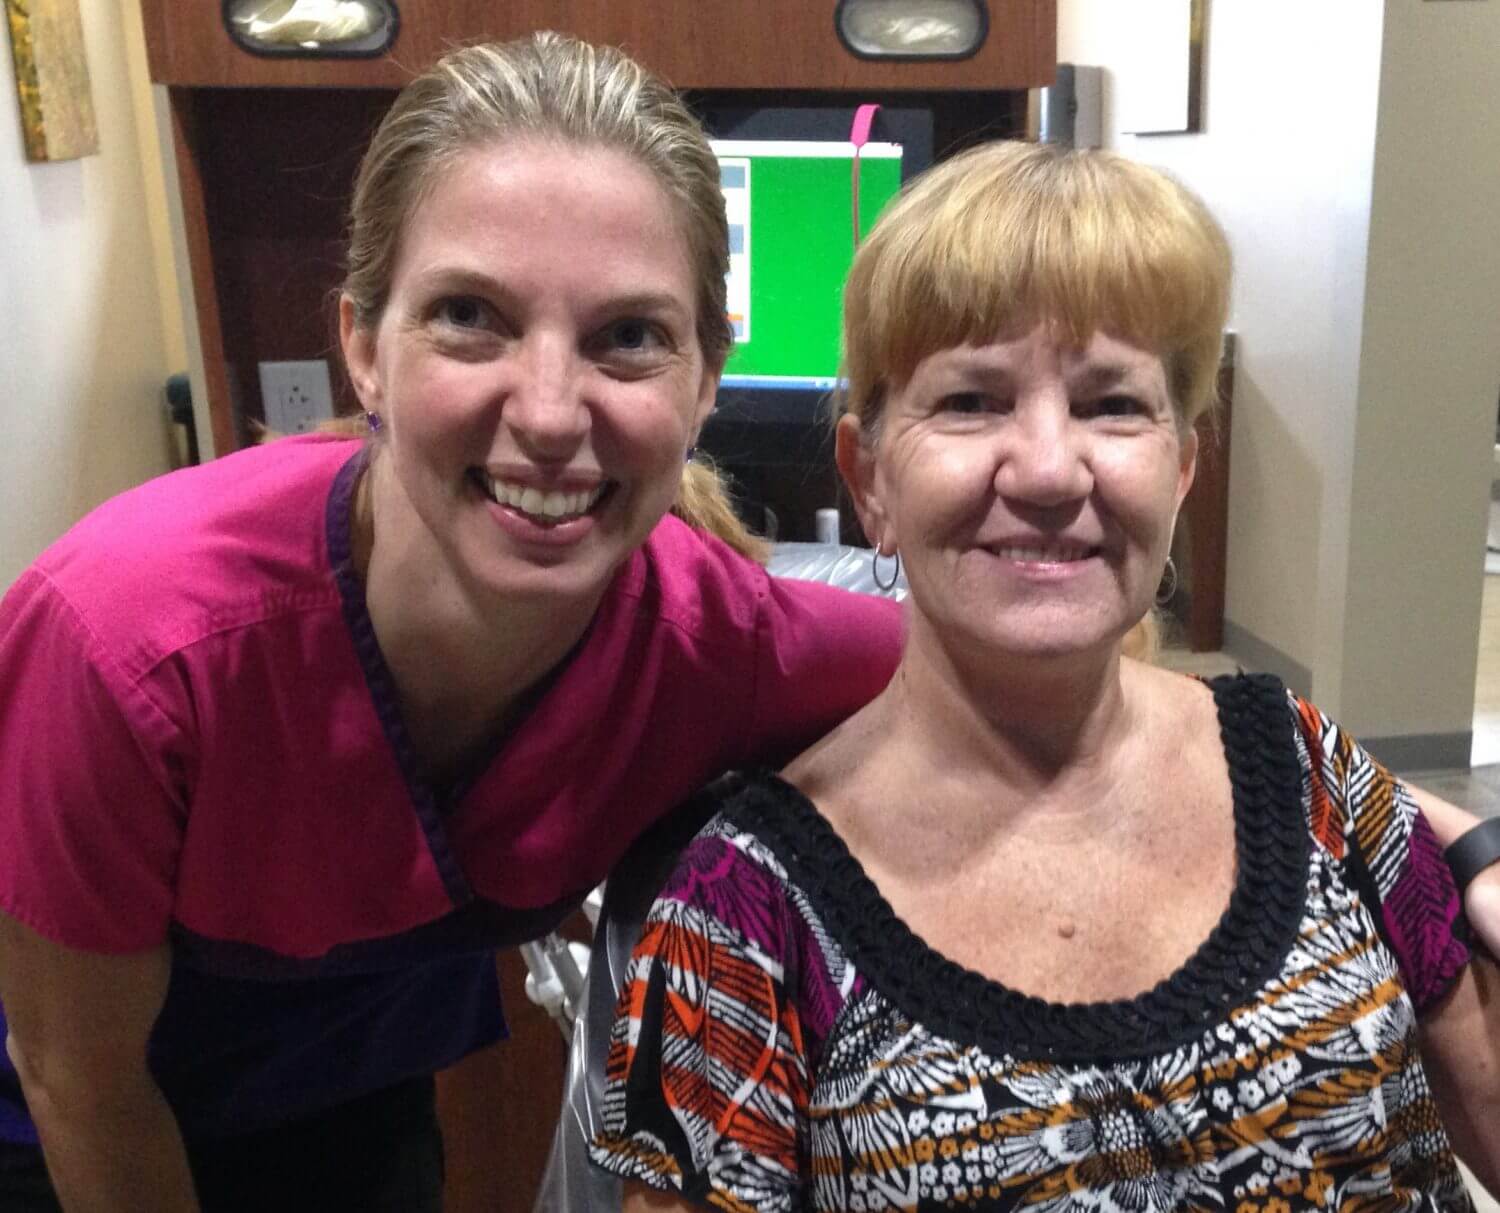 DLN Success story – Air Force Veteran Receives Life Changing Dental Treatment